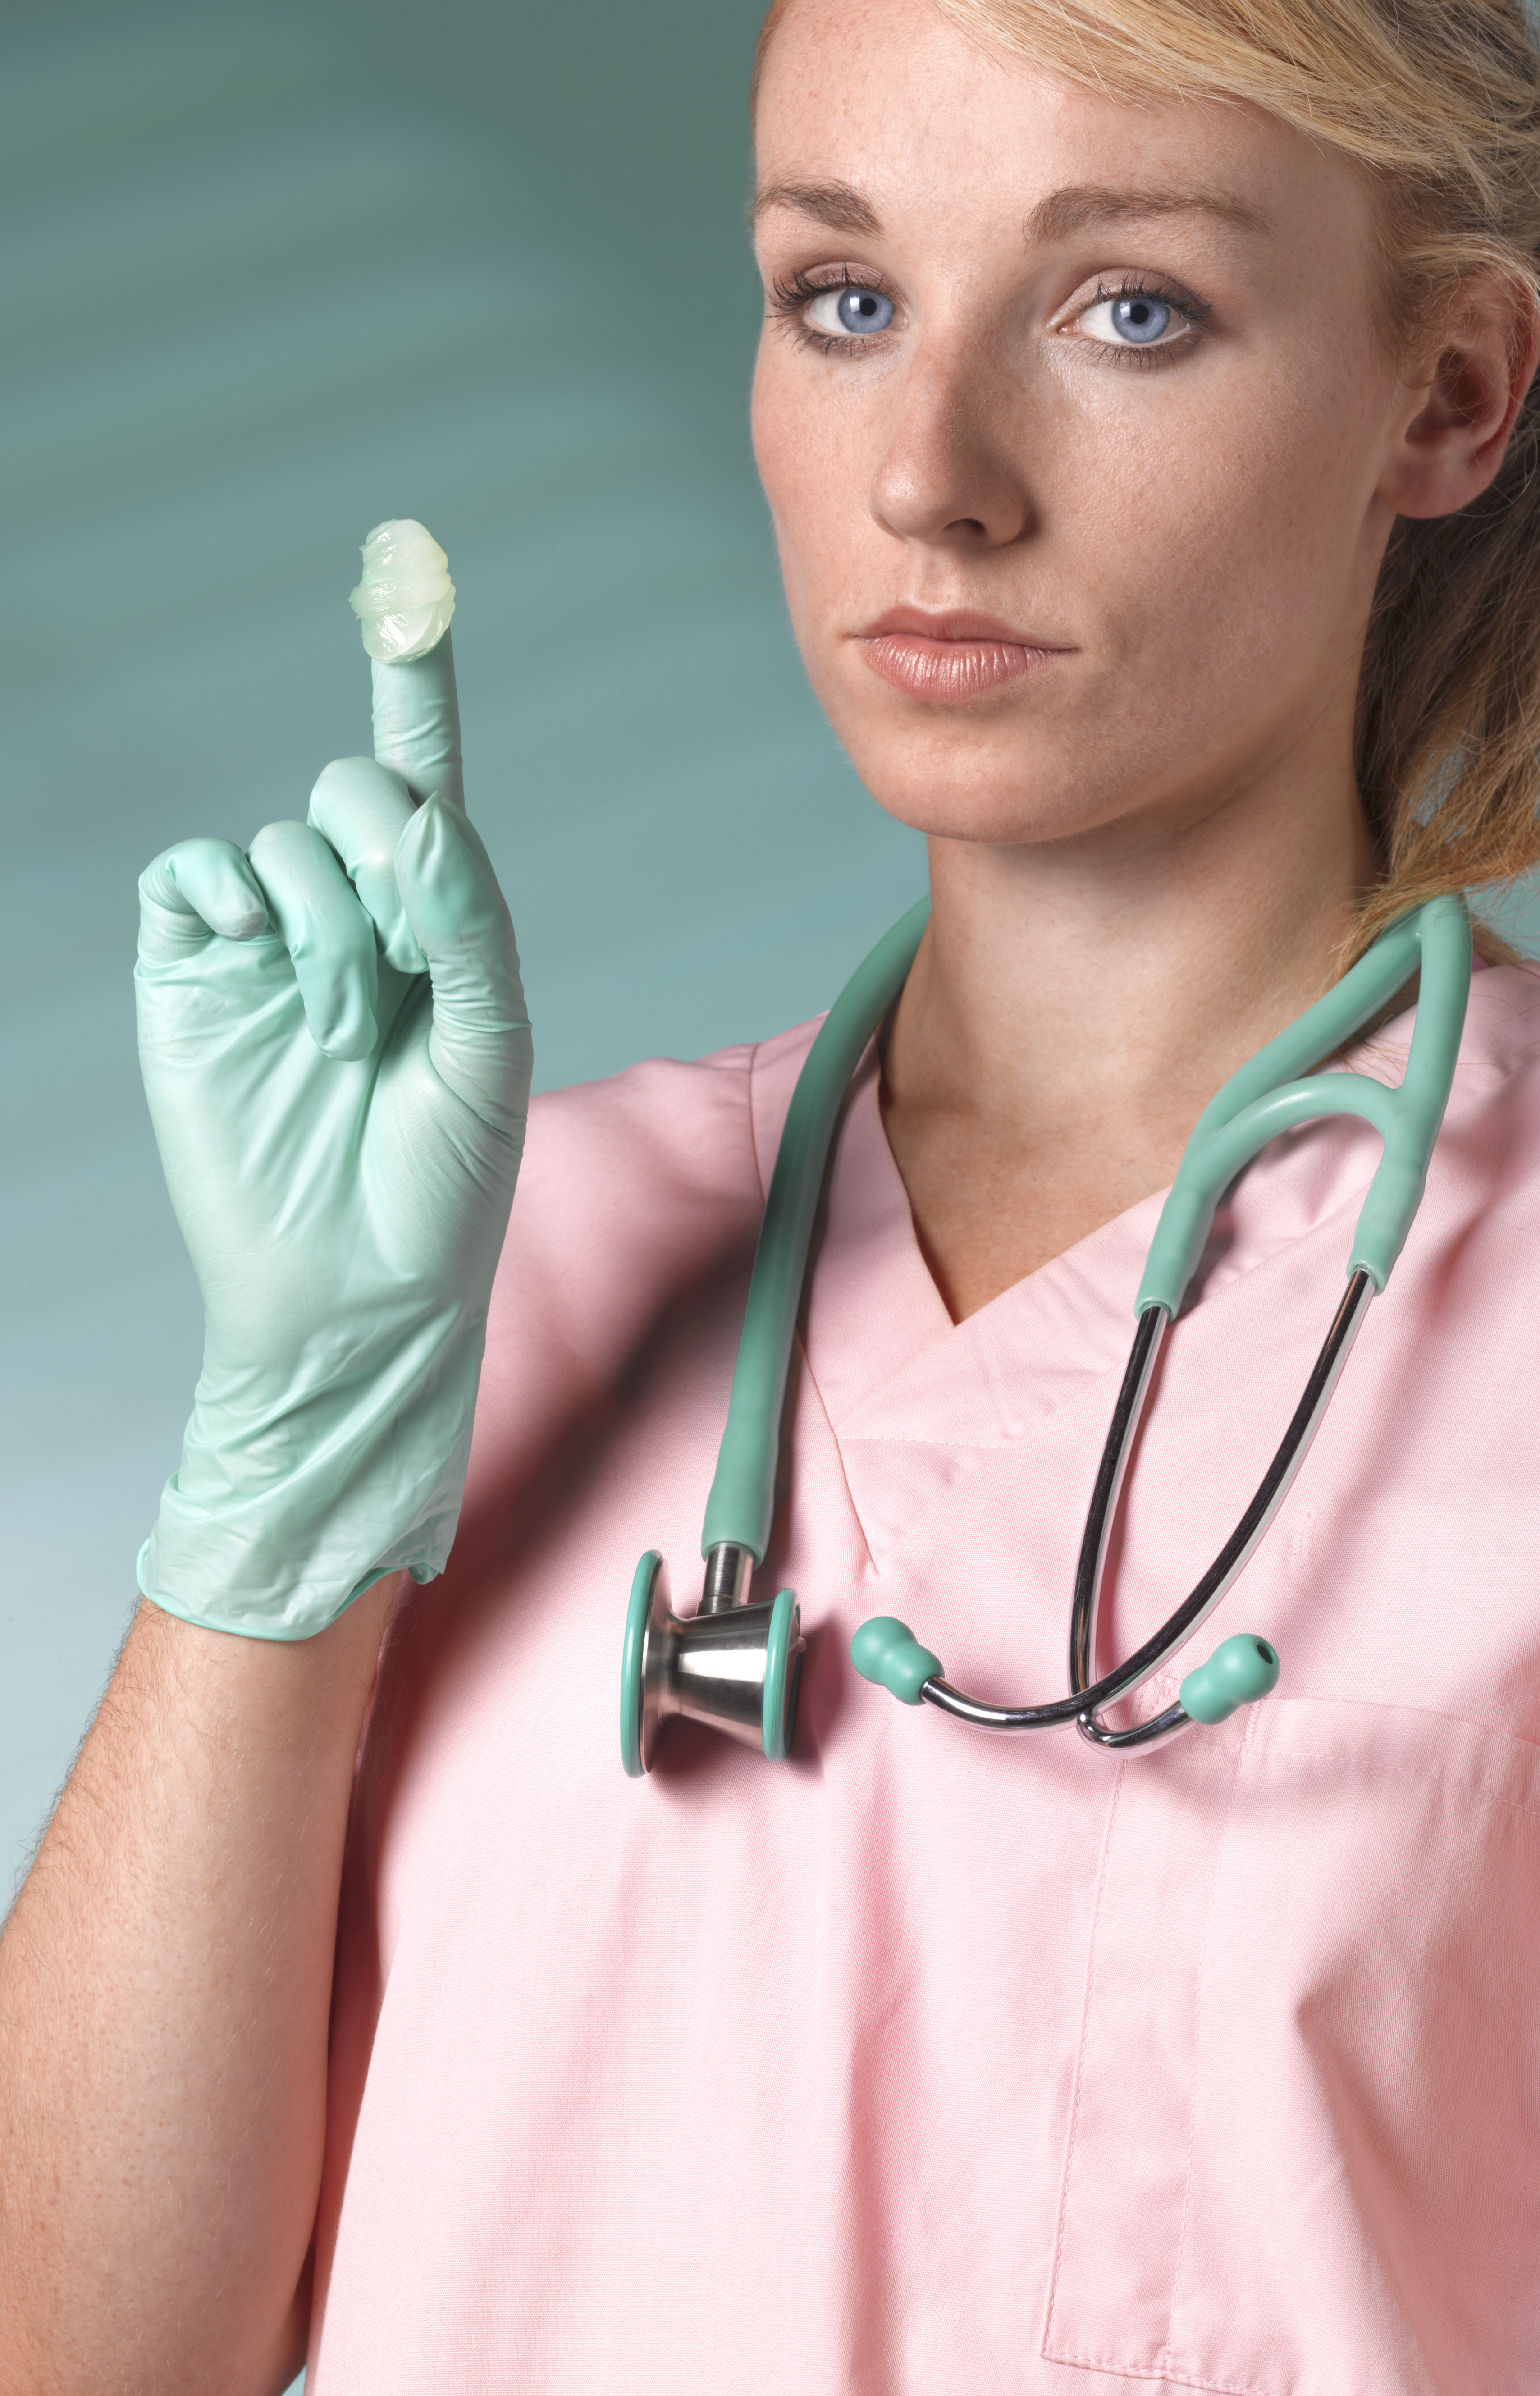 Medical professional in scrubs with a stethoscope holding up a dab of lubricant on her gloved finger